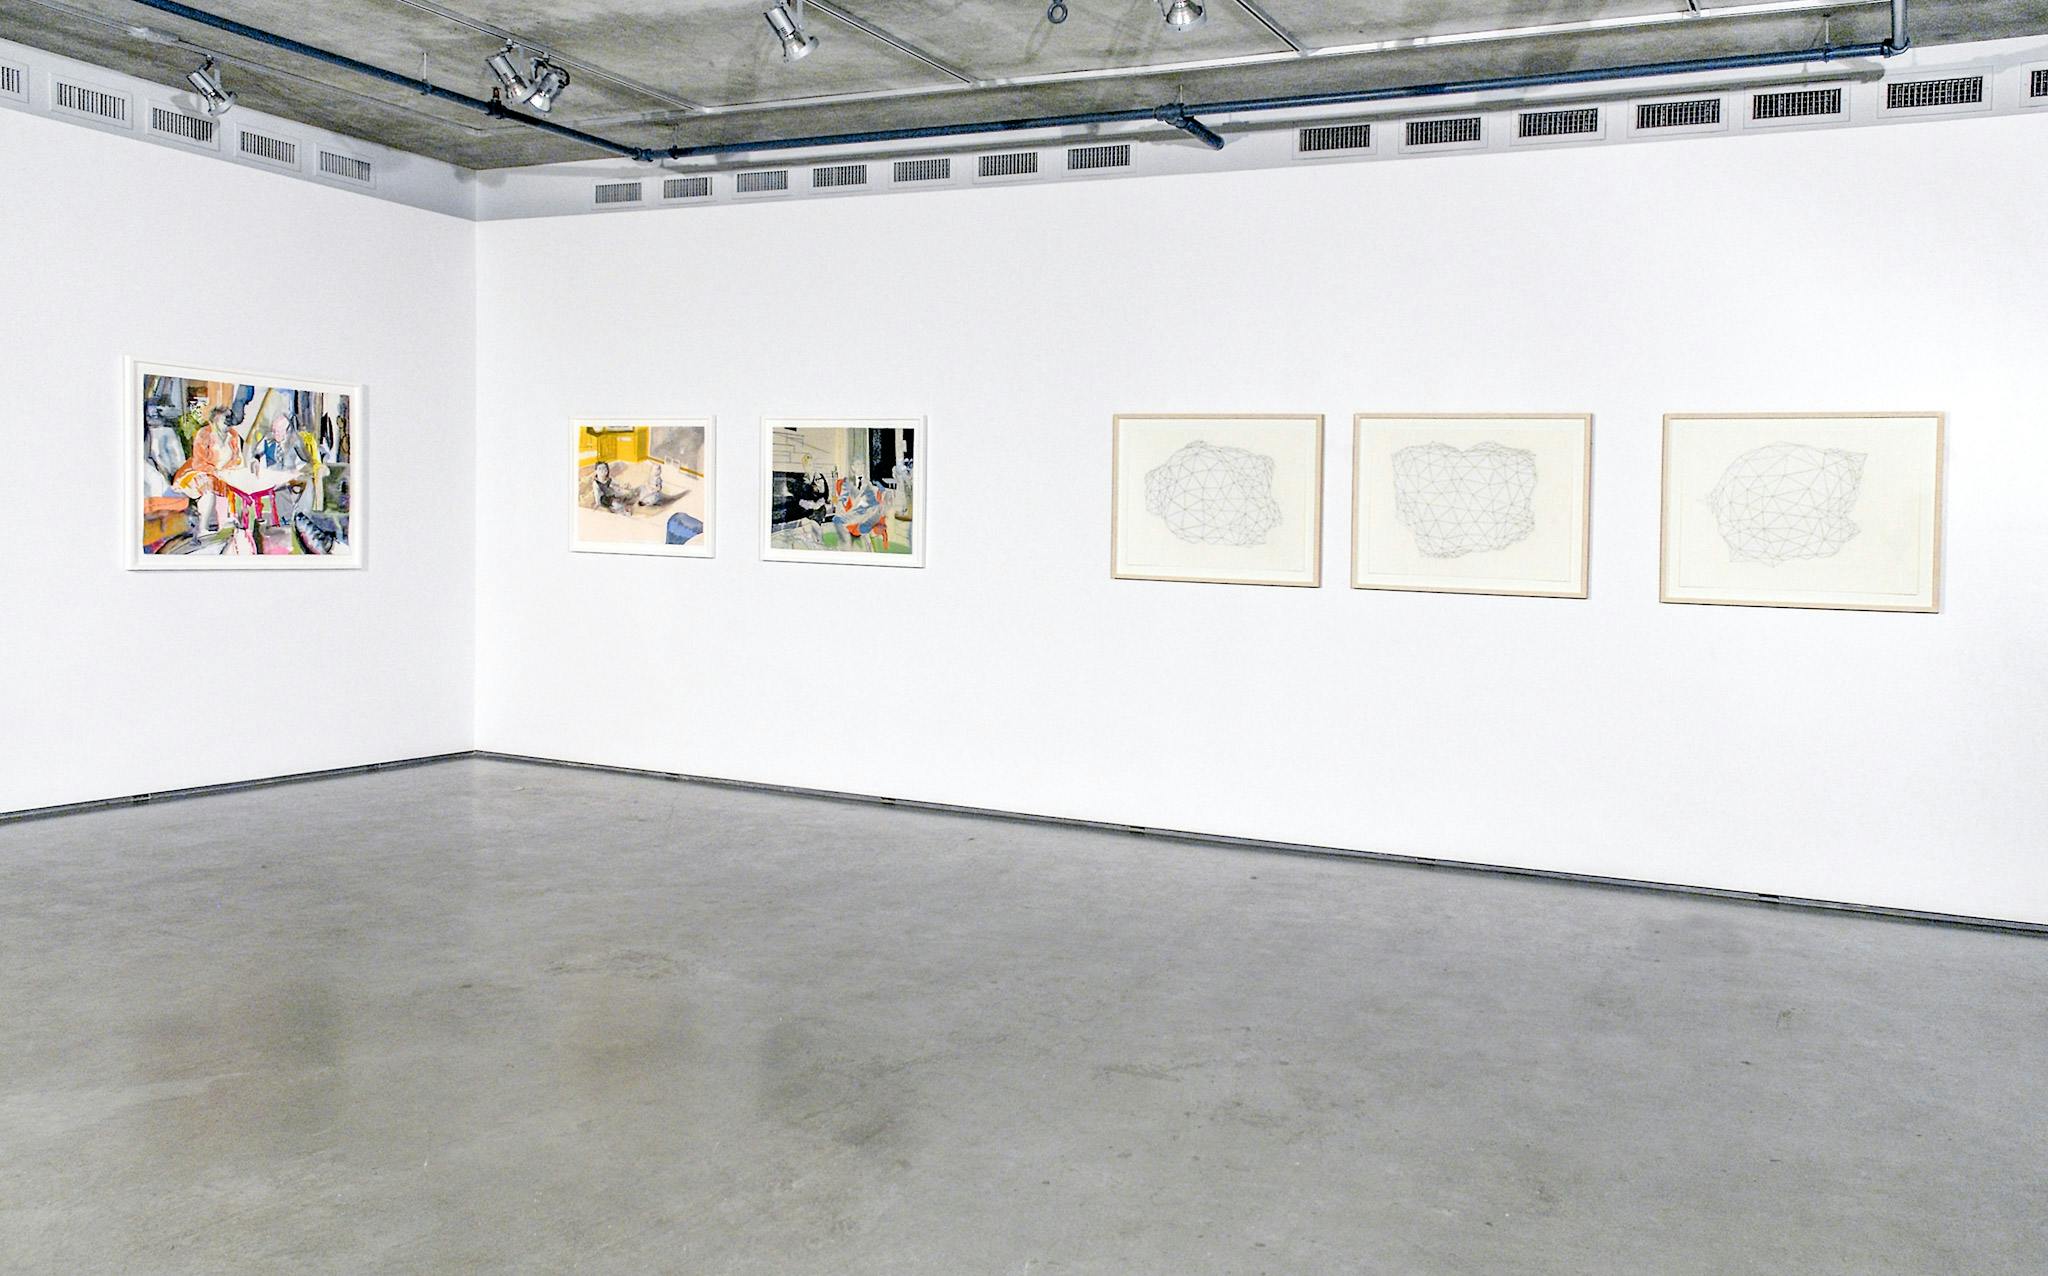 Six drawings are mounted on the gallery walls. The set of three coloured drawings on the left depicts people sitting inside. The other set of drawings show figures which look like a design of a dorm. 